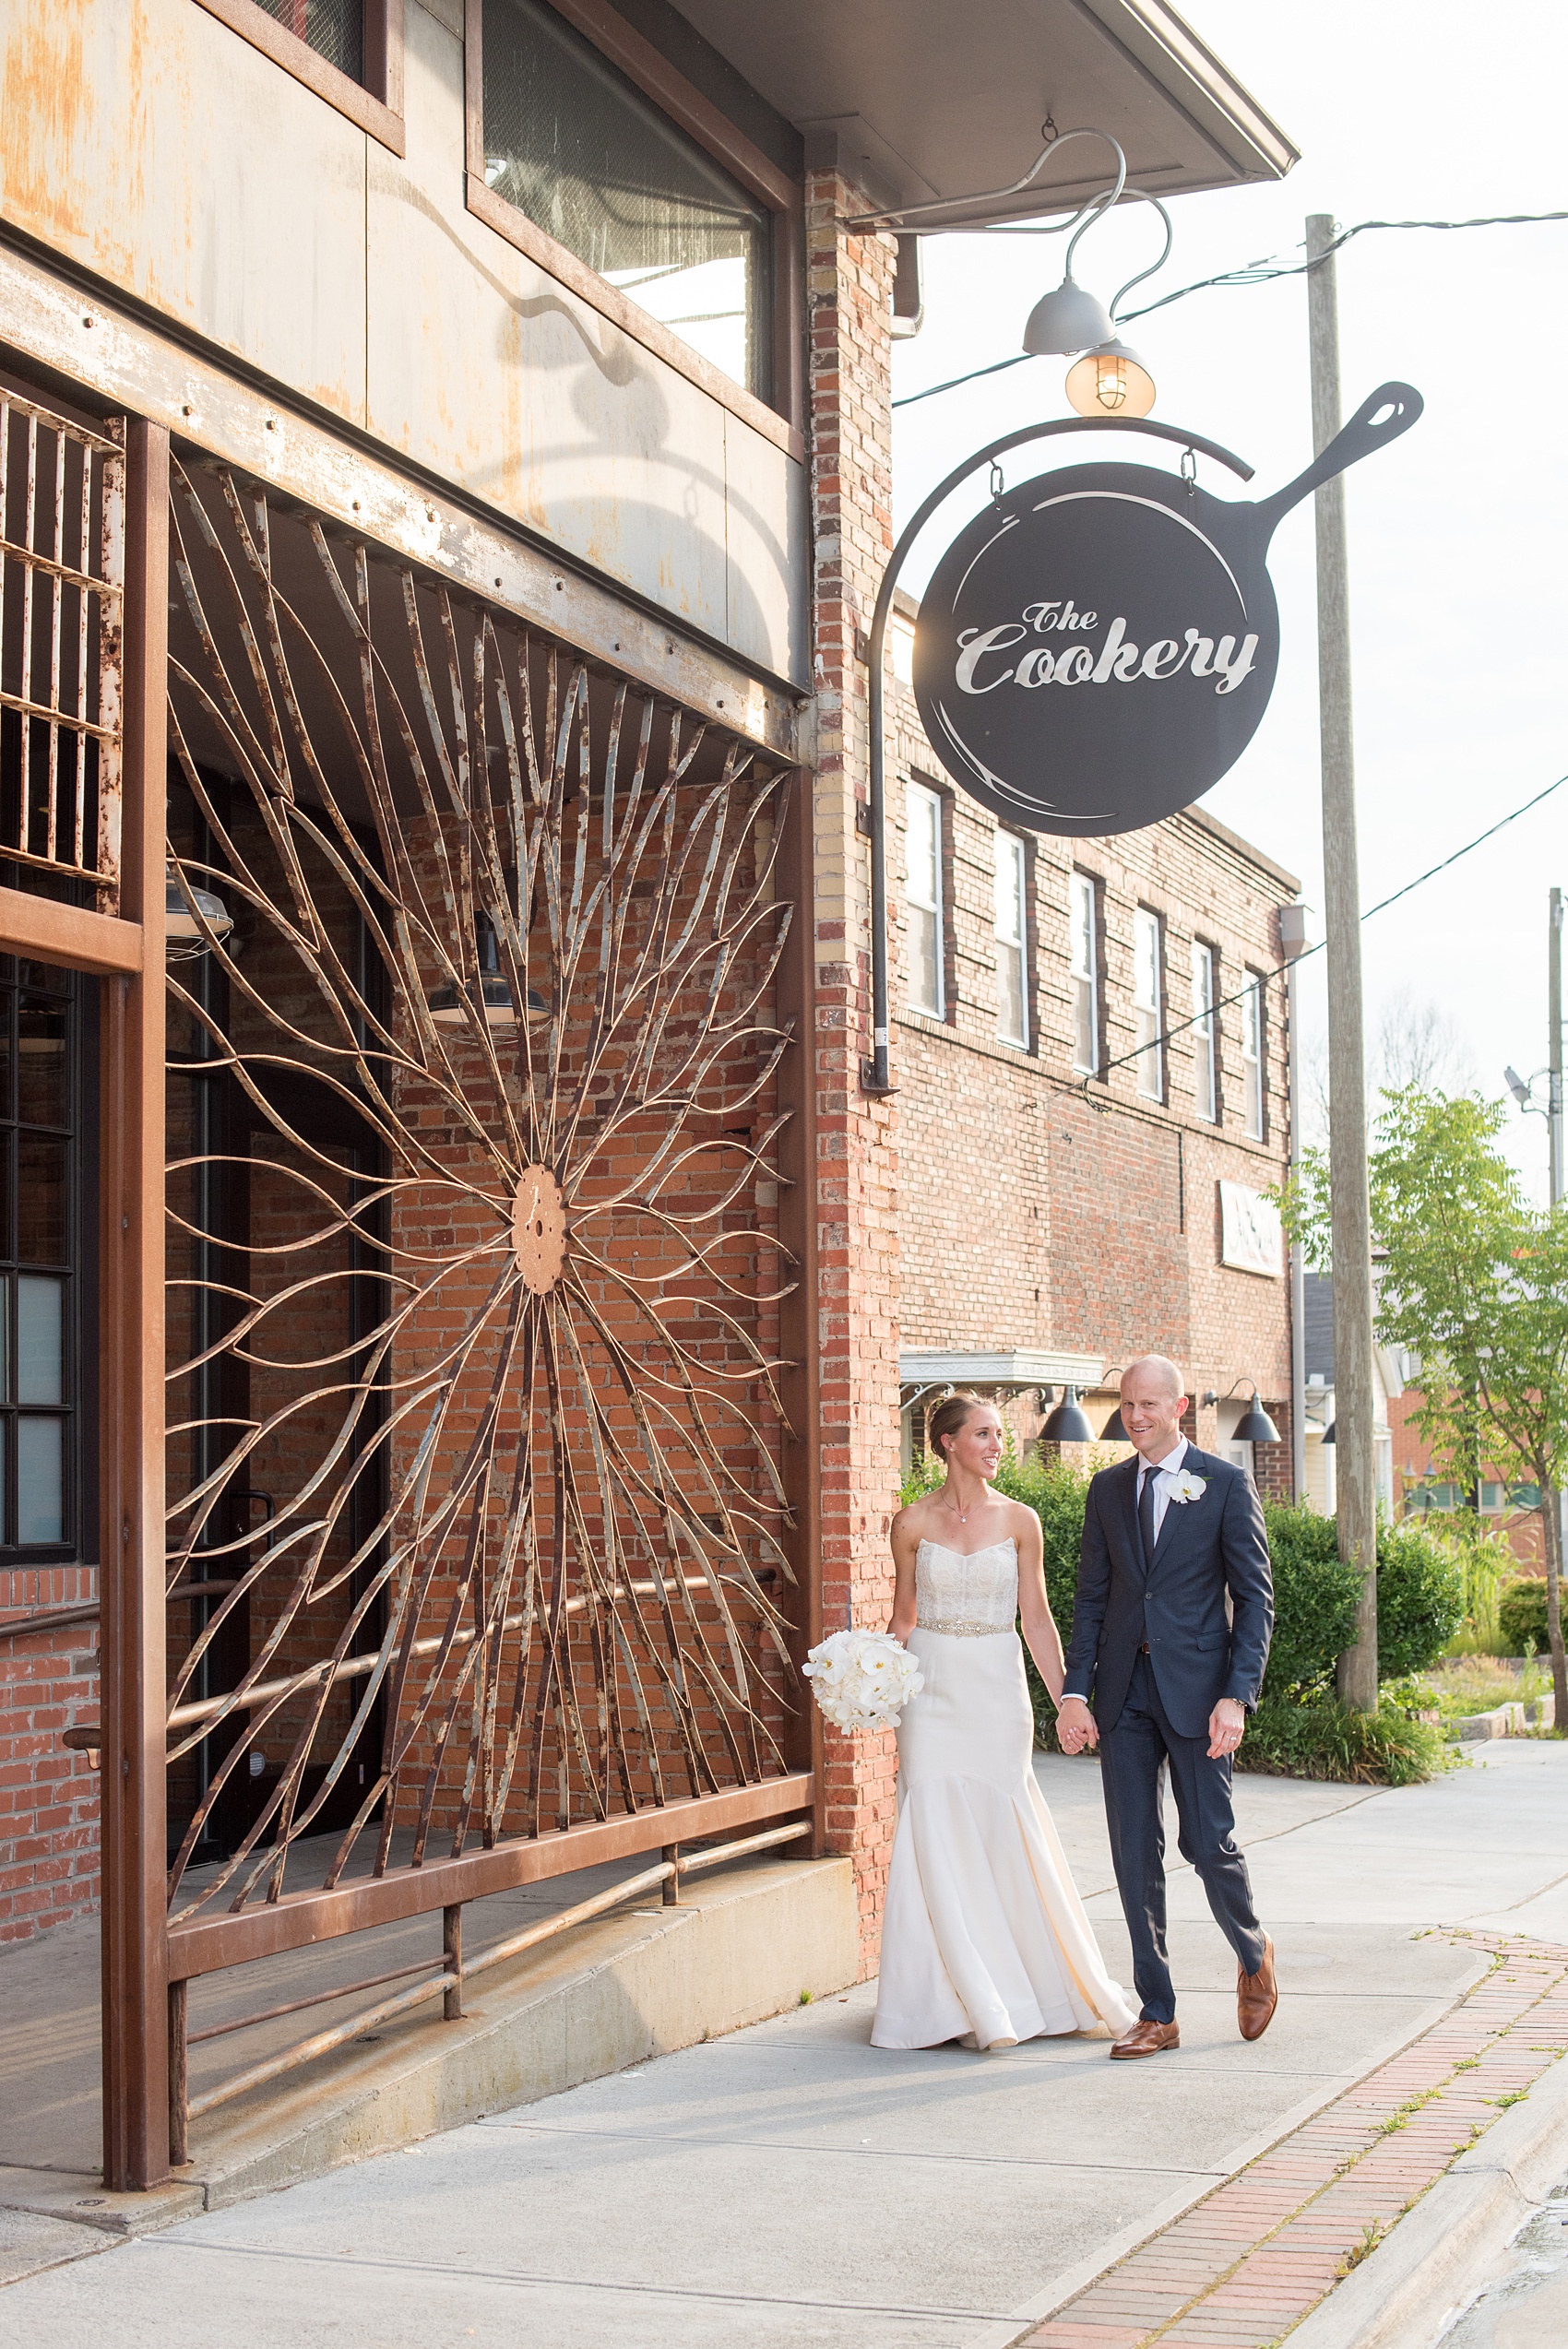 The Cookery Durham wedding photos by Mikkel Paige Photography. The bride and groom walk in front of a rustic iron gate.